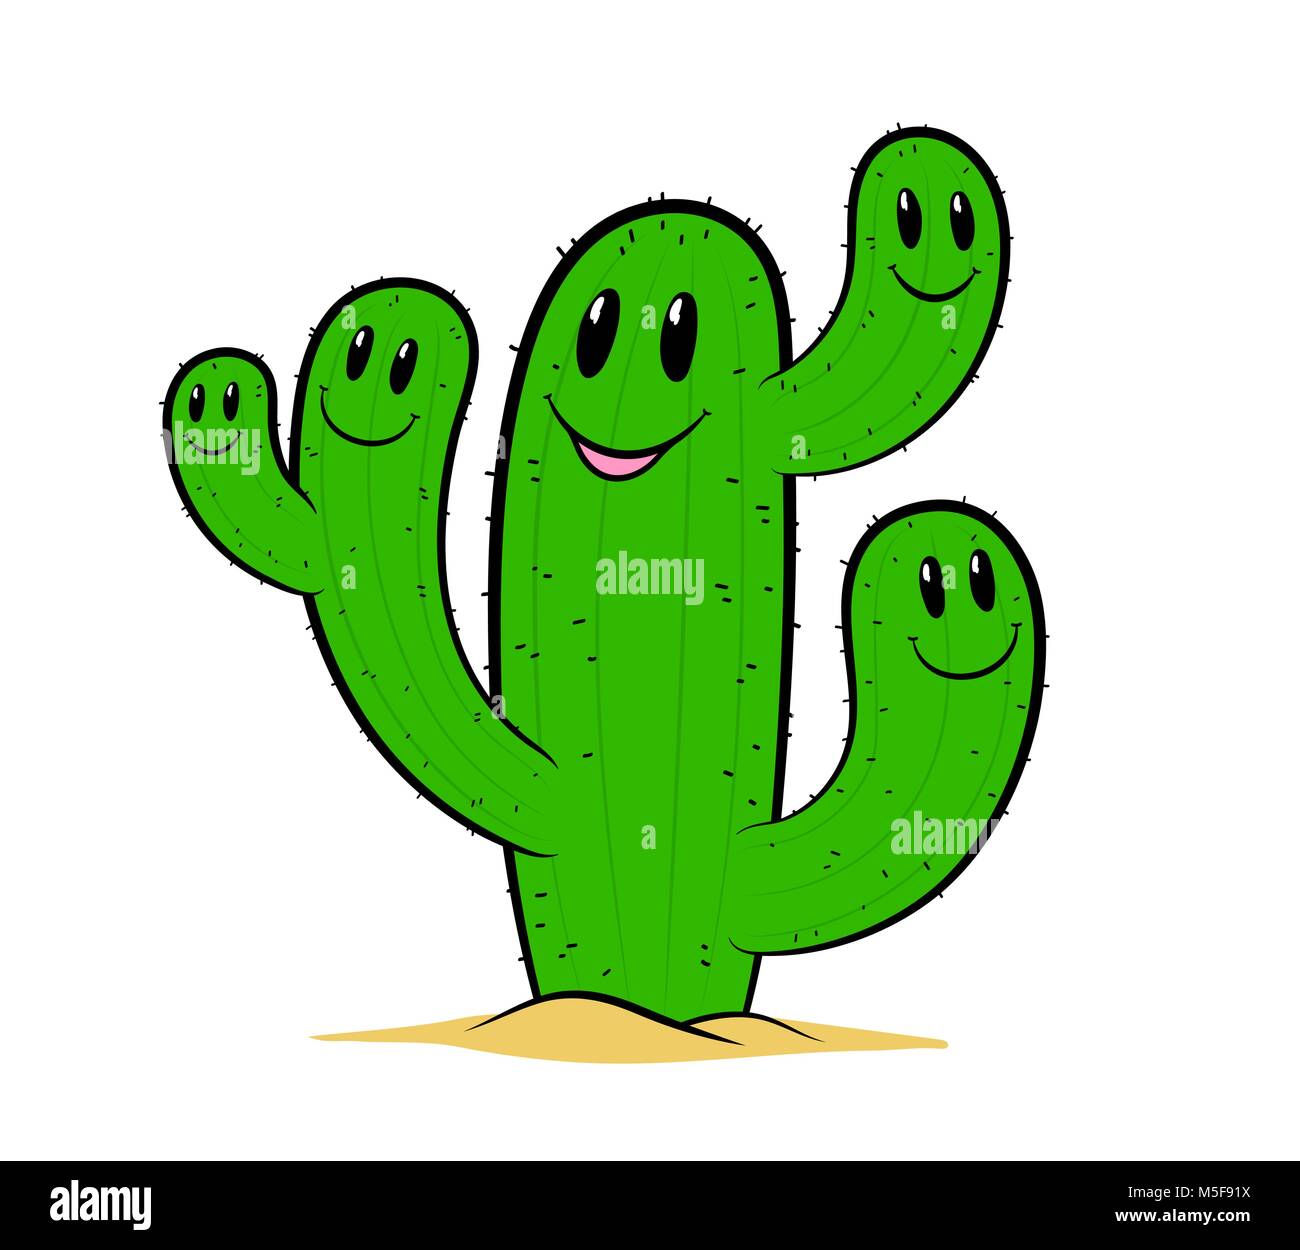 Cute green cartoon cactus friends with happy smiling faces on its branched spiny arms growing in desert sand isolated on white, vector eps8 illustrati Stock Vector